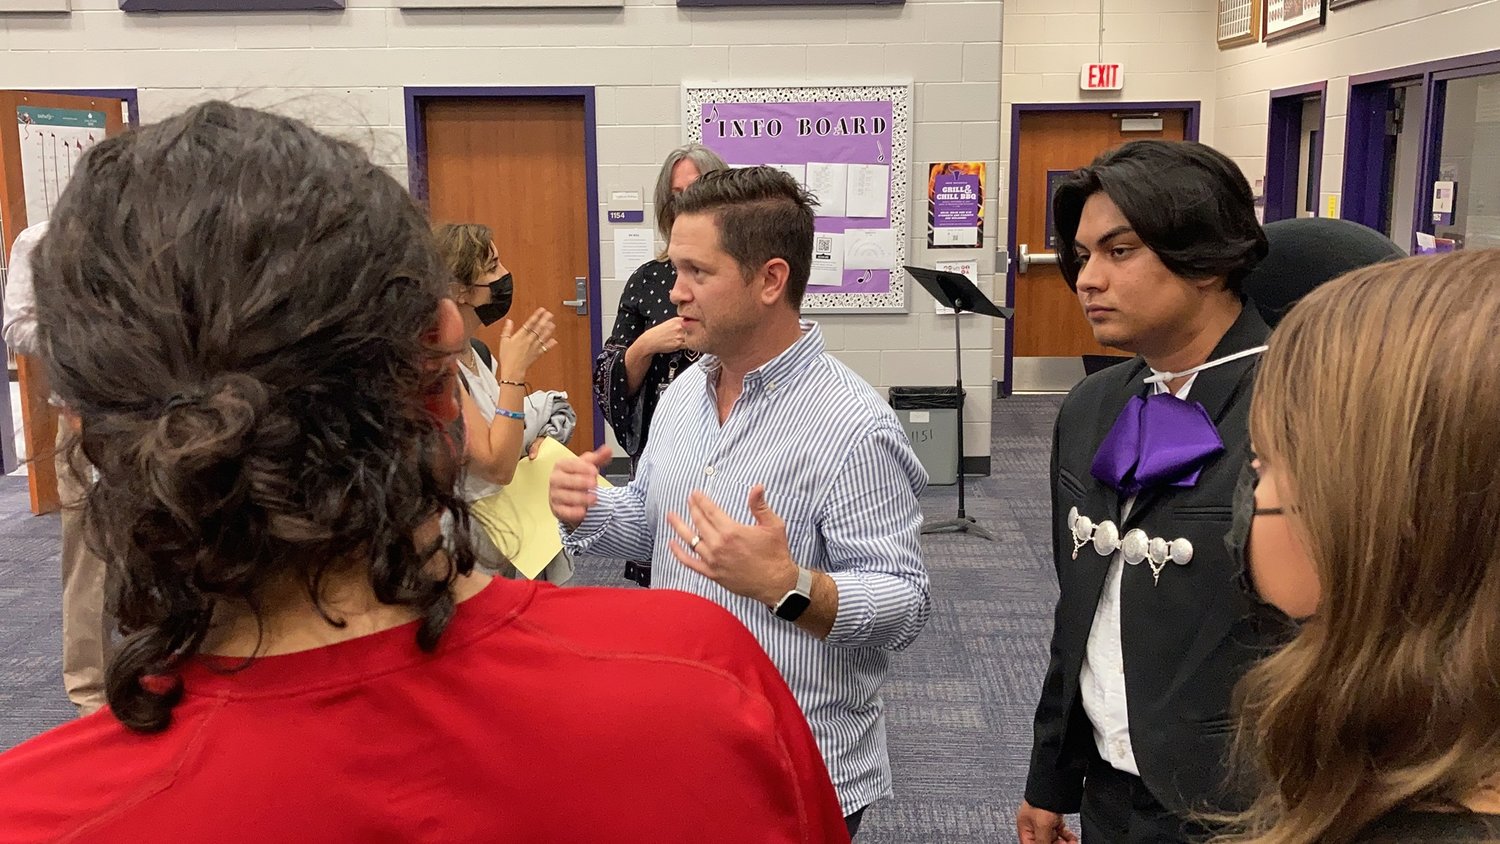 Morton Ranch High School Director of Orchestras Gabriel Katz speaks with students and staff at the campus about the Maverick’s new mariachi group. Katz said having the group was a long-time goal for him as a music instructor.